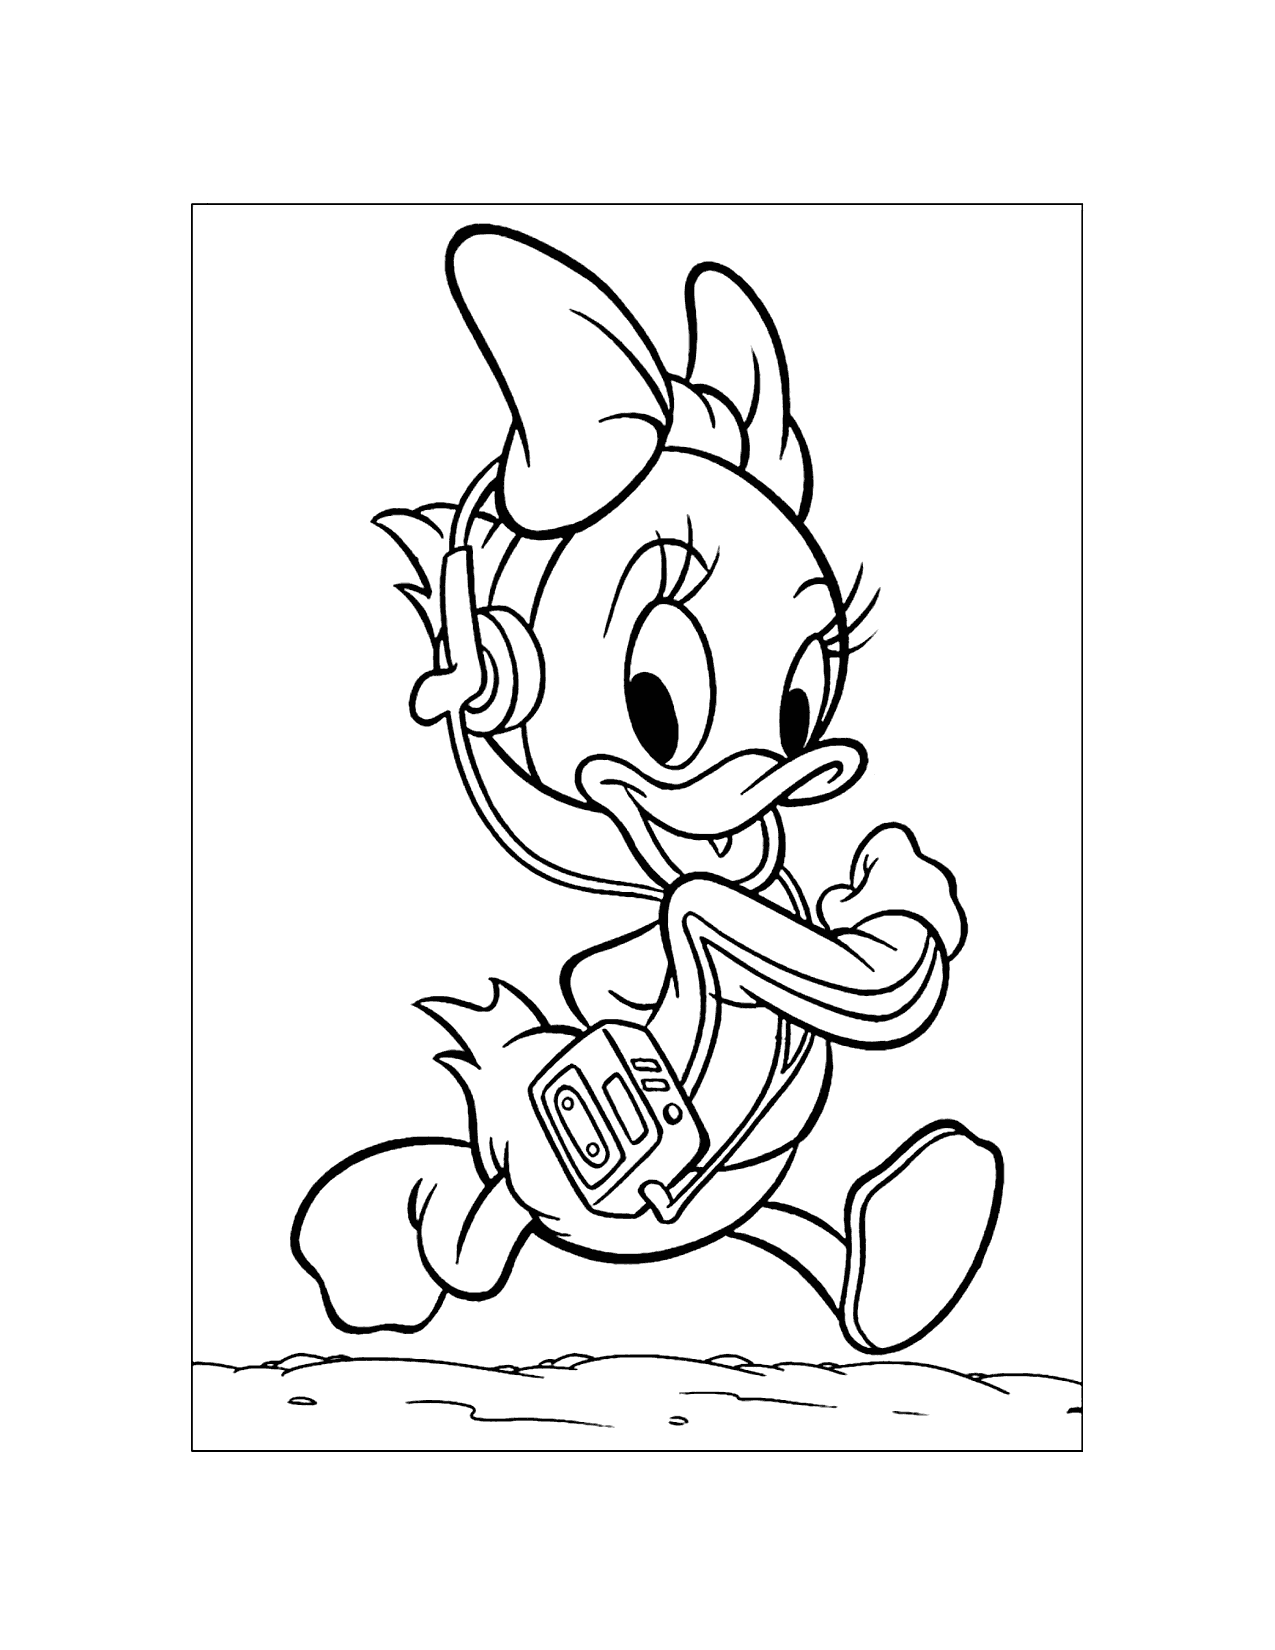 Cute Daisy With A Walkman Coloring Page